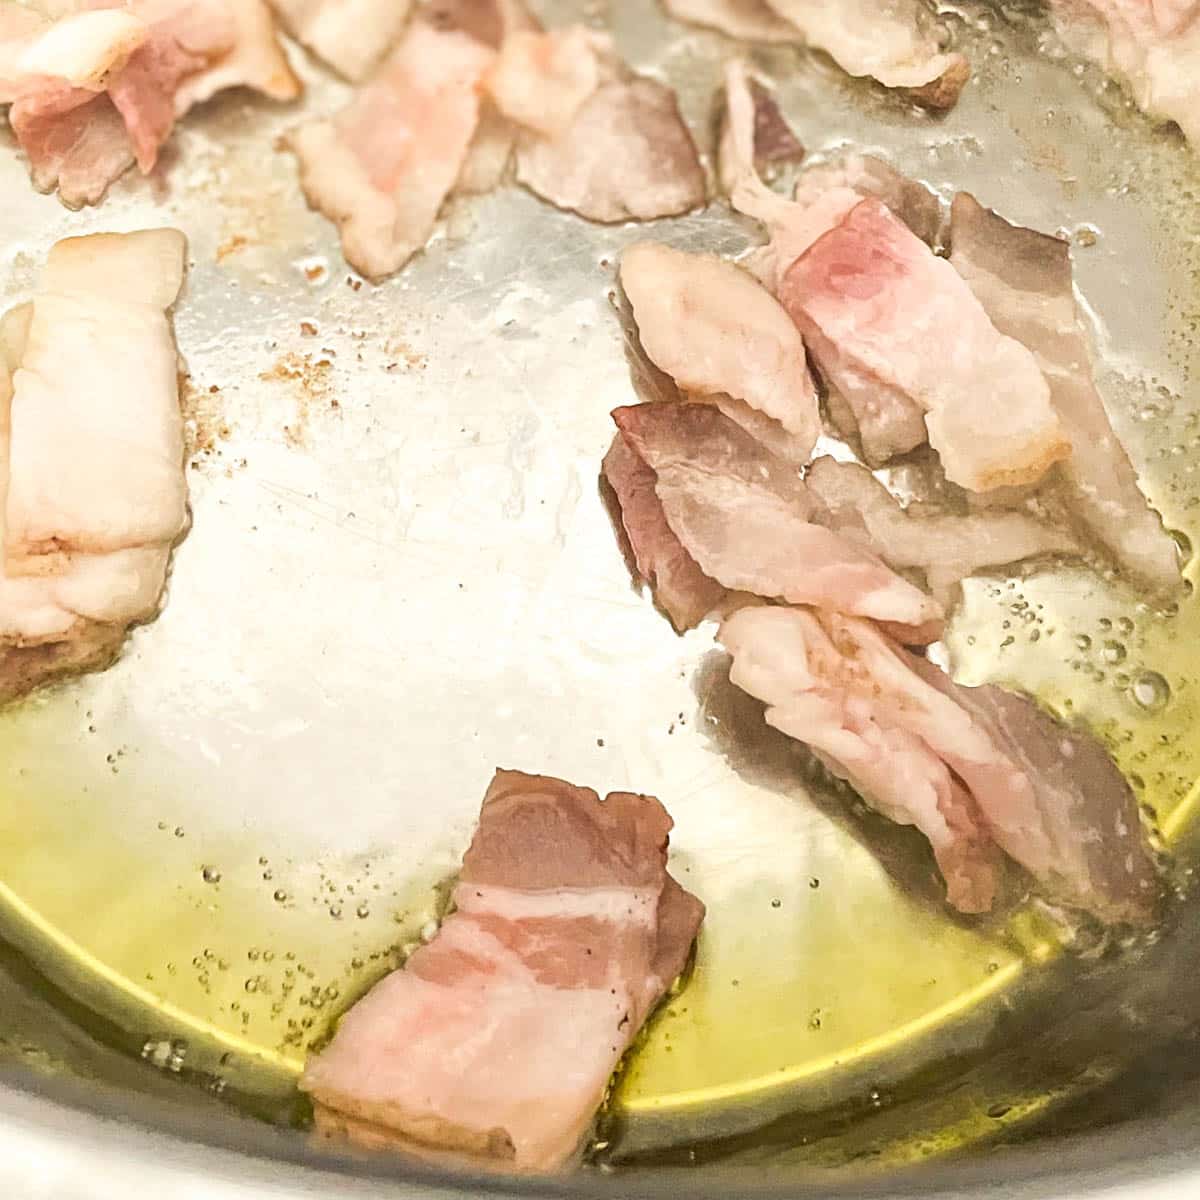 Chopped bacon is rendered in the Instant Pot.